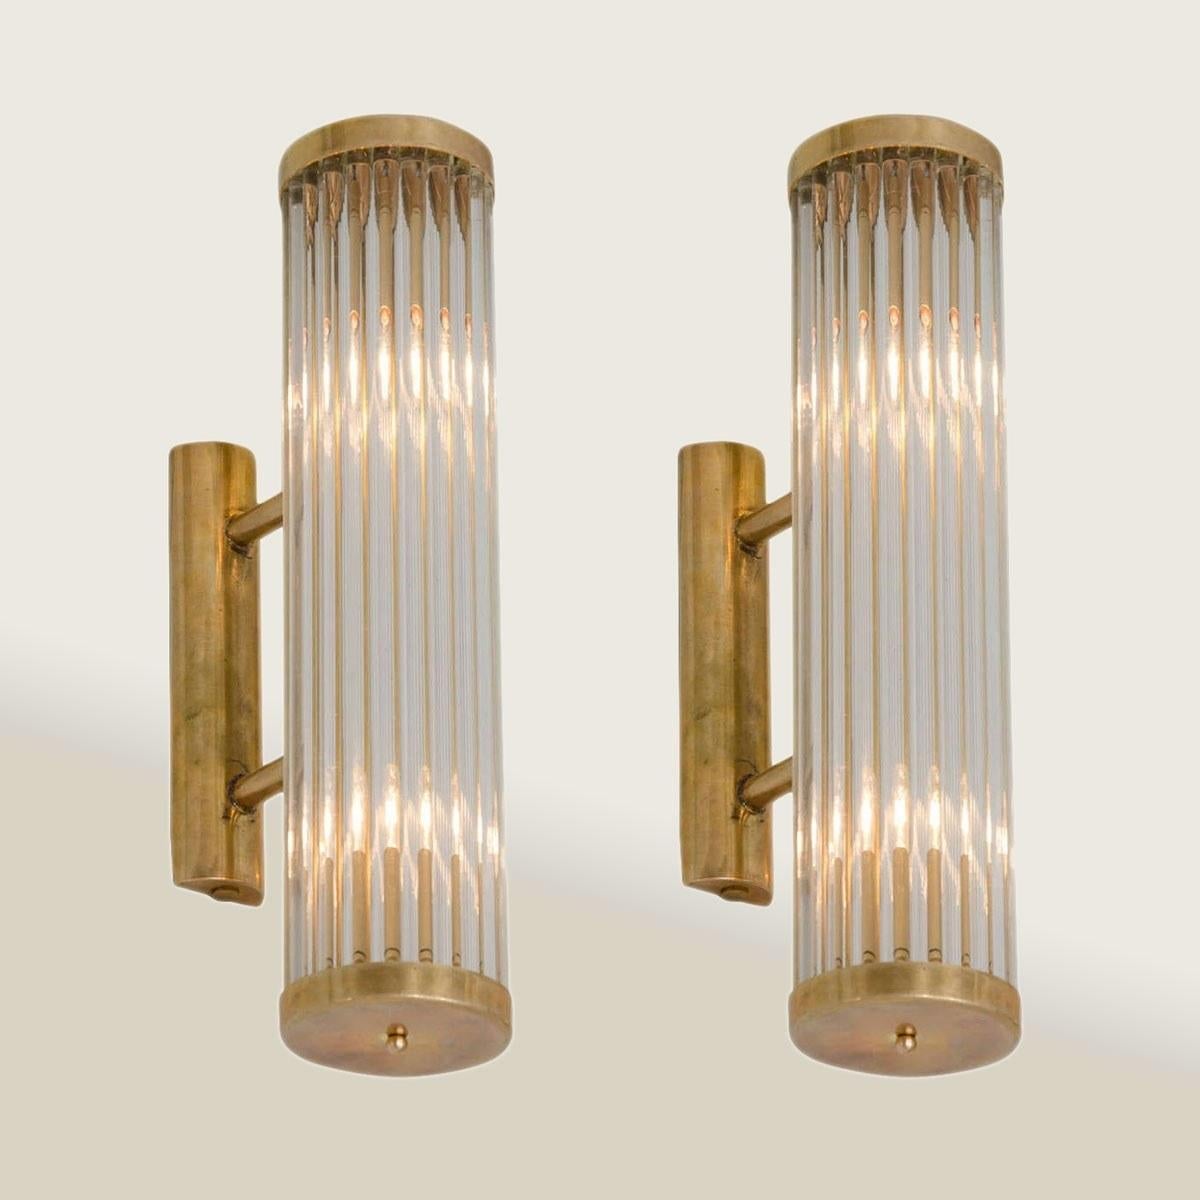 Contemporary Art Deco inspired Italian wall lights in the style of ‘Venini’.
Each light comprises of a circle of slim Murano glass rods capped top and bottom by round brass plates that attach with two slim brass arms to a brass wall bracket.
Two